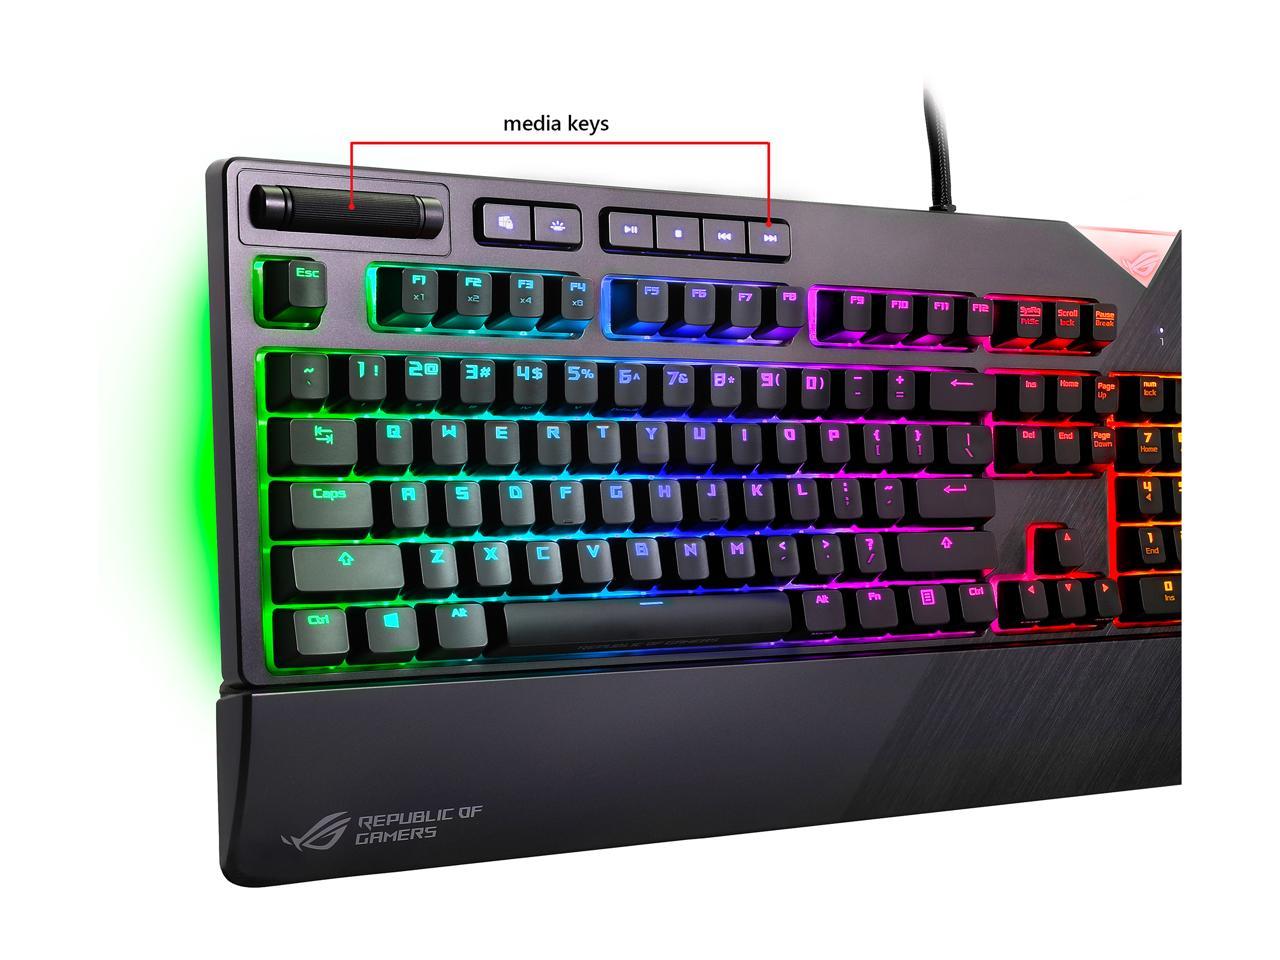 ASUS ROG Strix Flare RGB Mechanical Gaming Keyboard with Aura Sync - Cherry MX Red